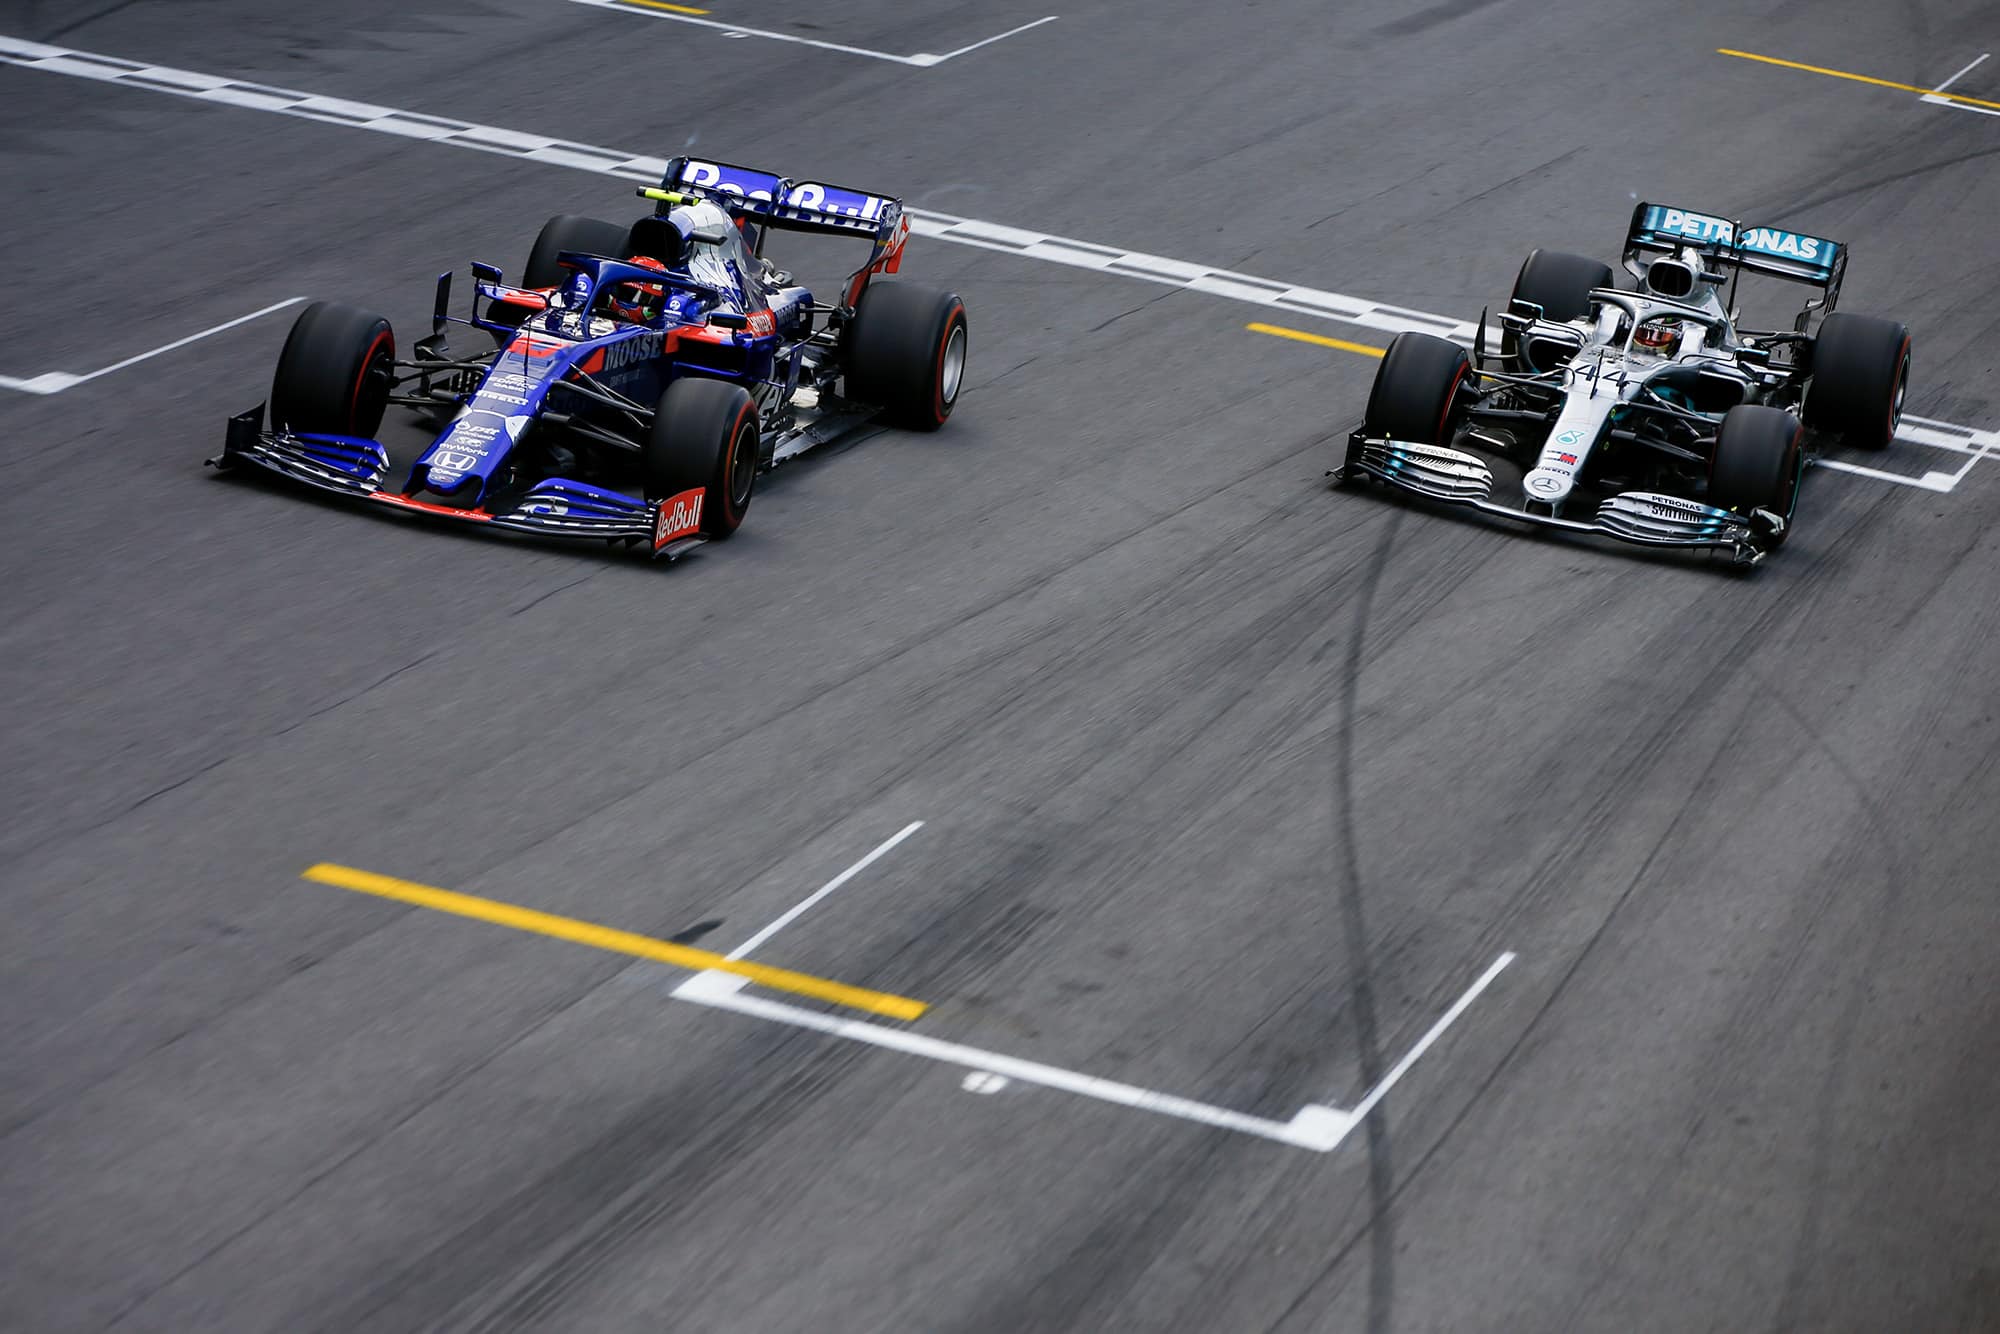 Gasly and Hamilton virtually side by side at the finish of the 2019 Brazilian Grand Prix